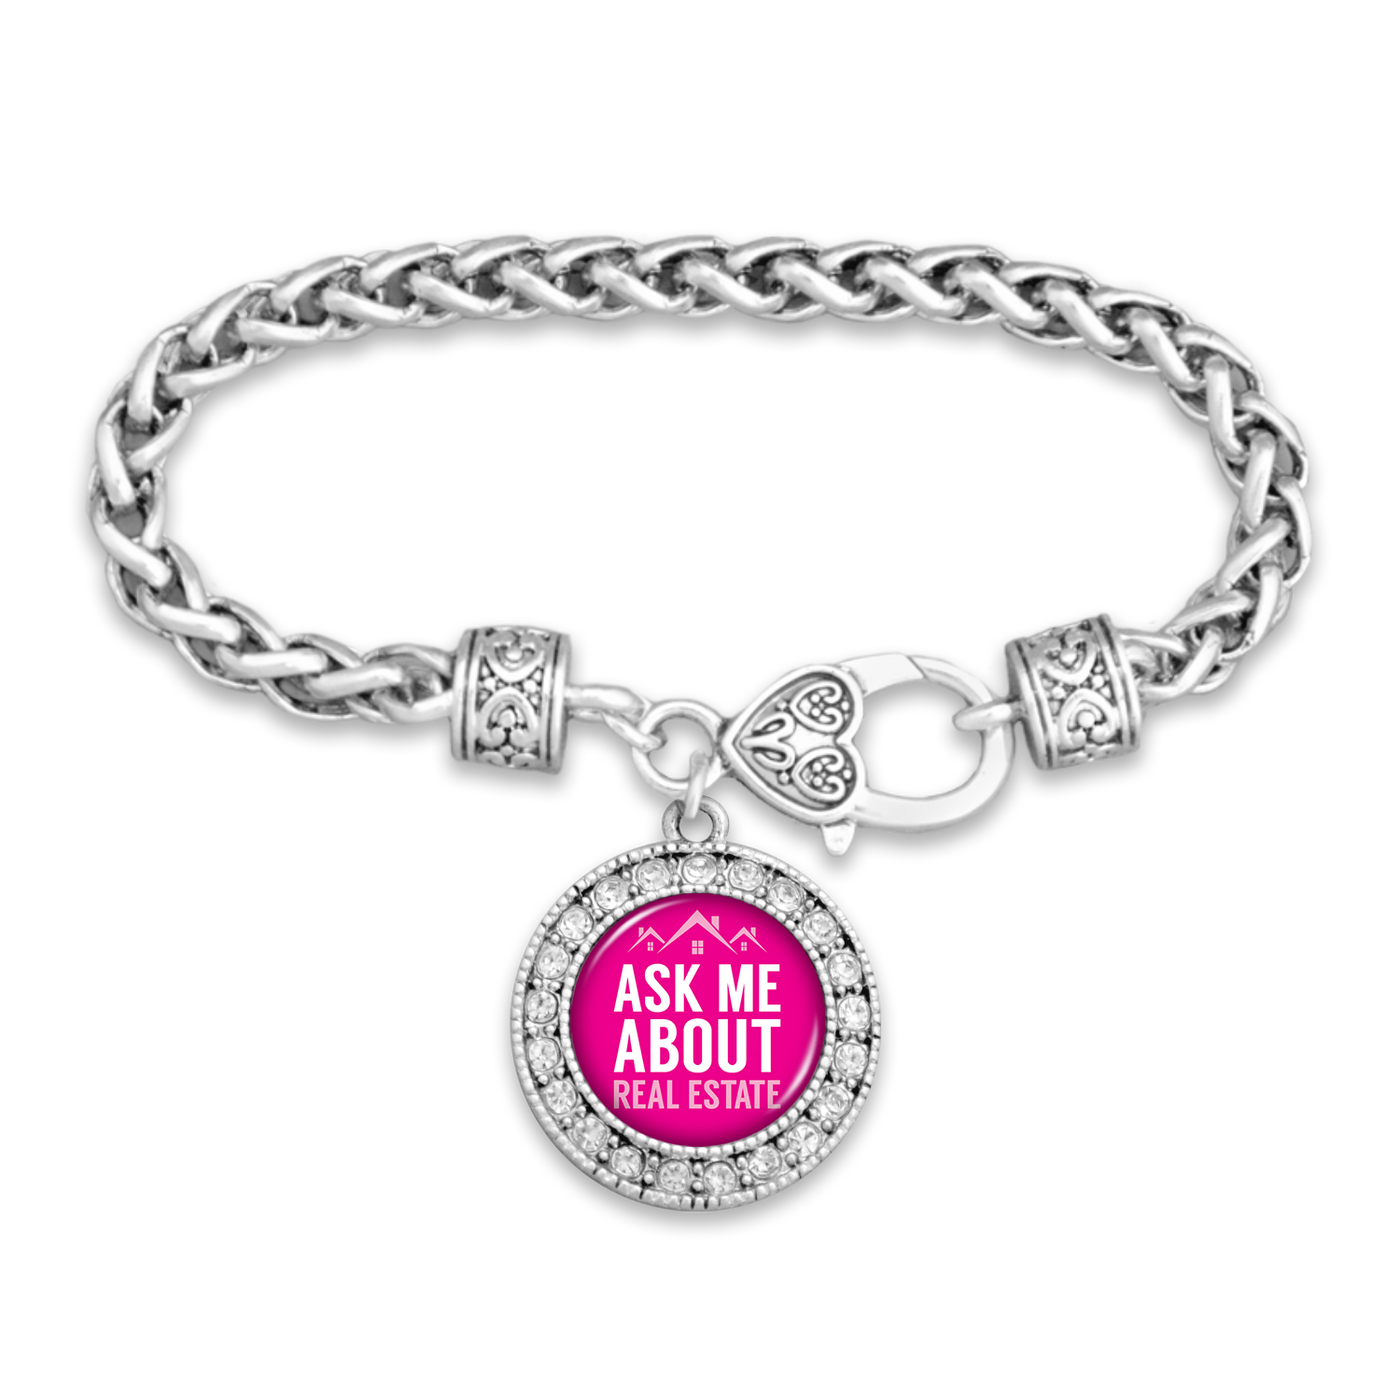 Ask Me About Real Estate Clasp Bracelet